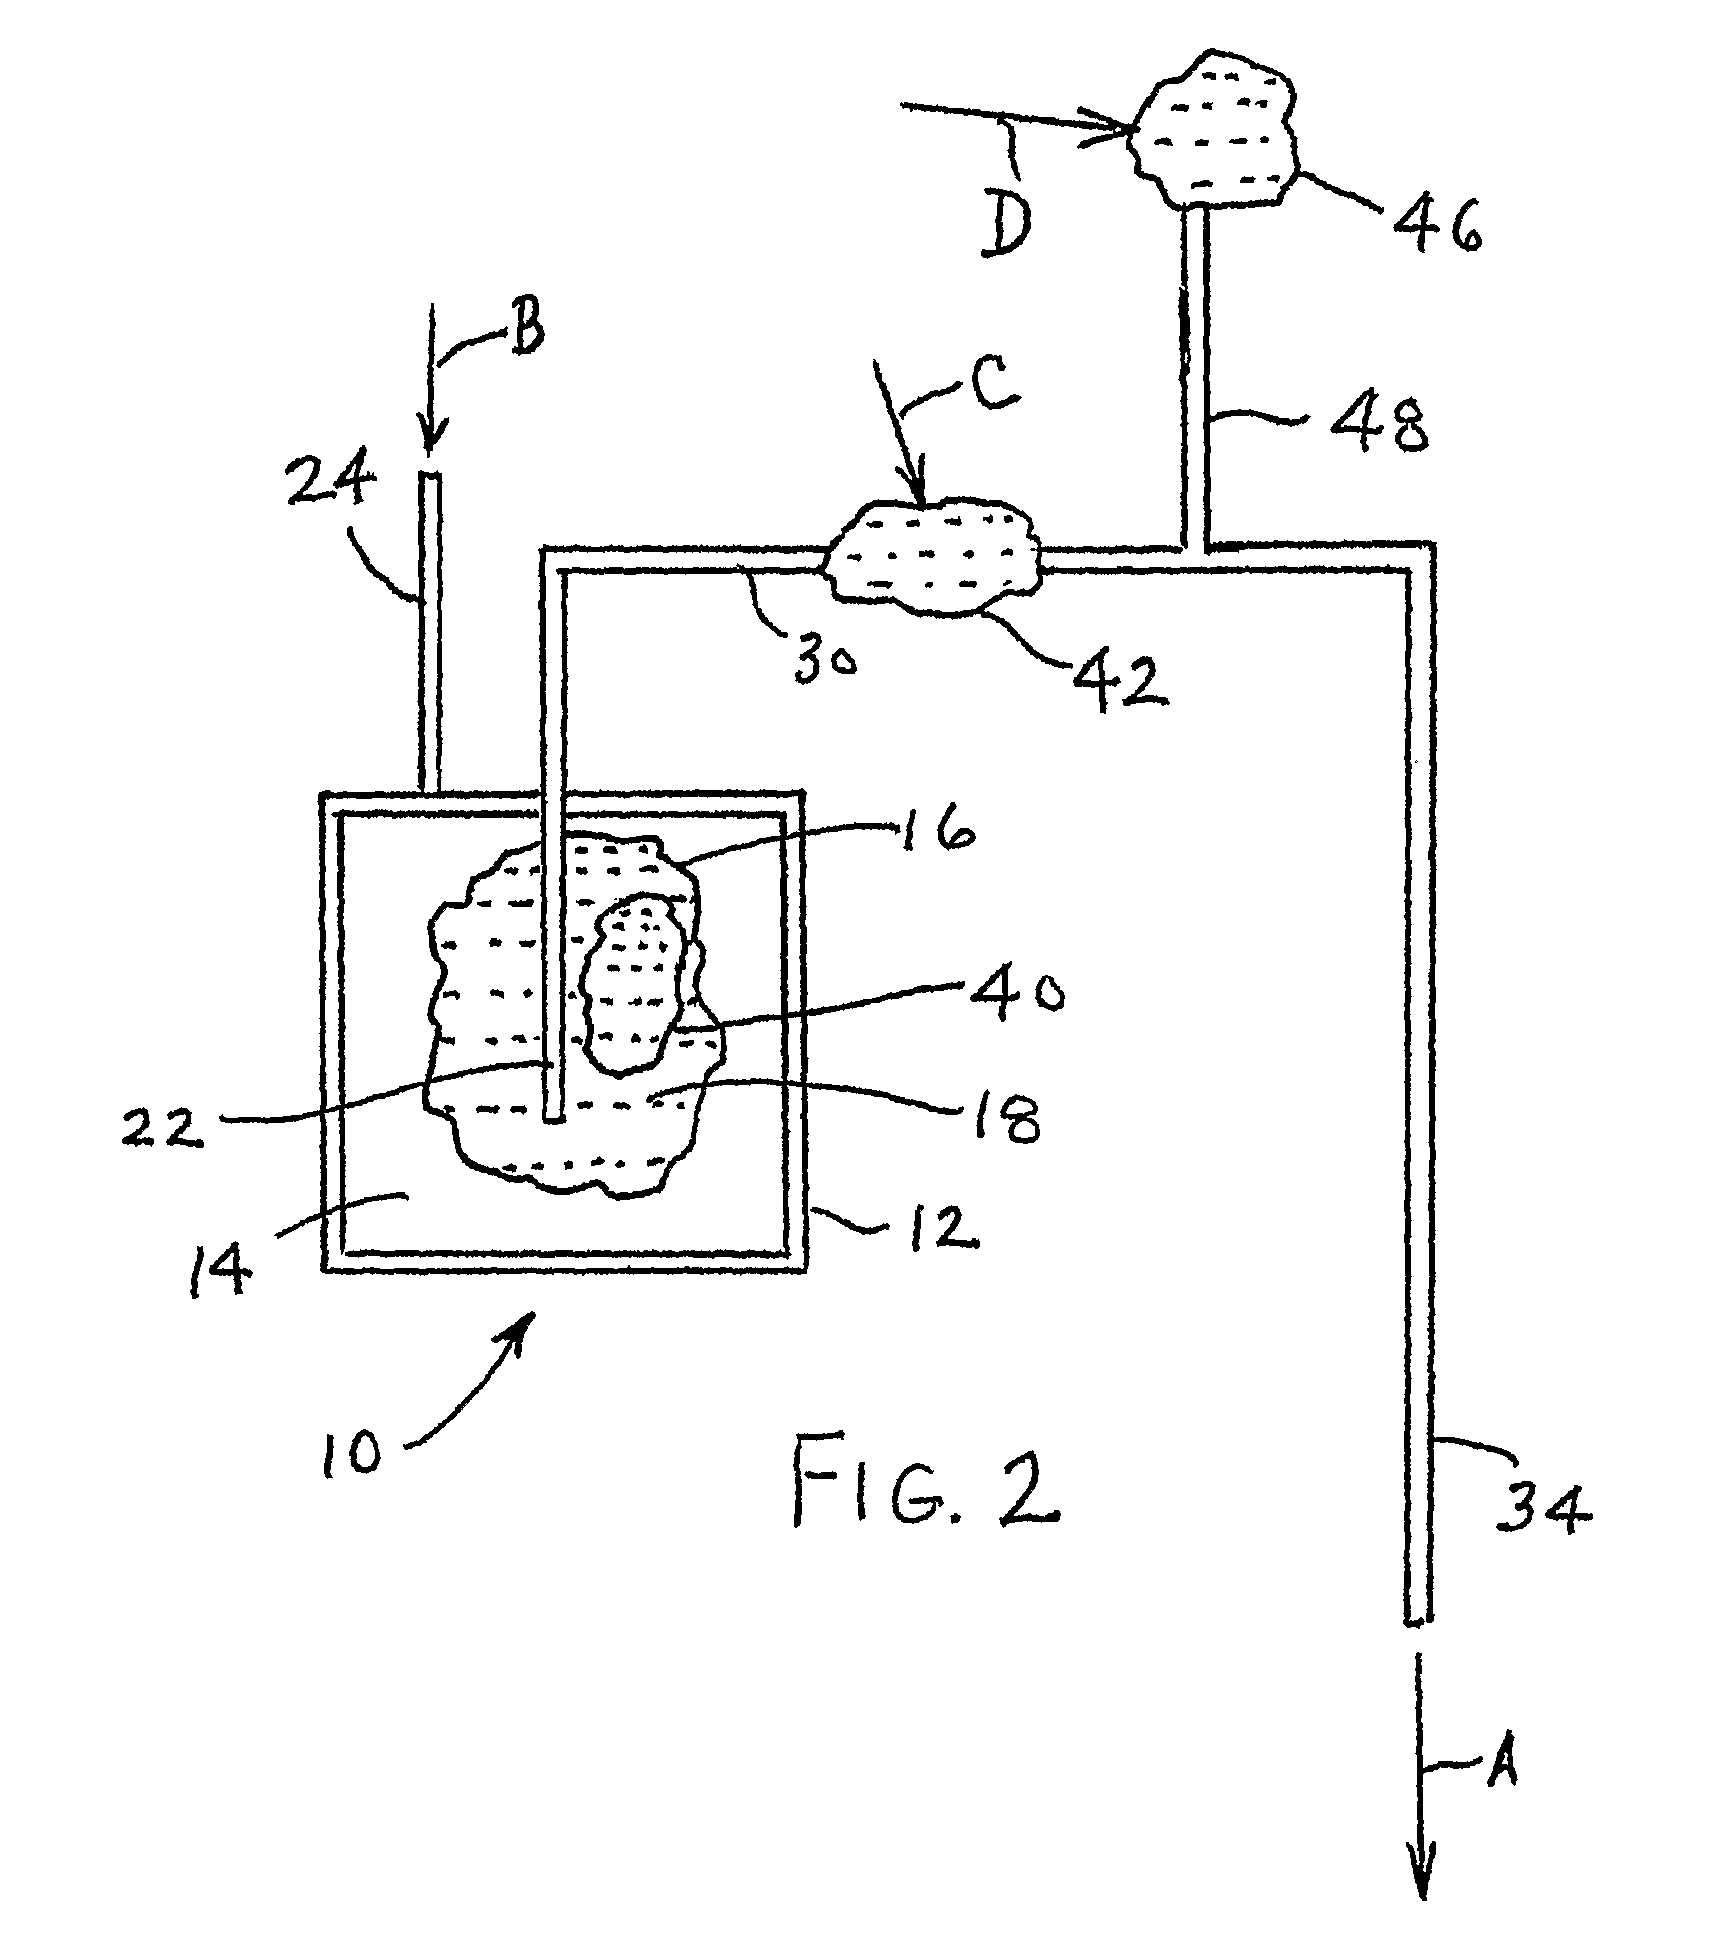 Liner-based liquid storage and dispensing systems with empty detection capability